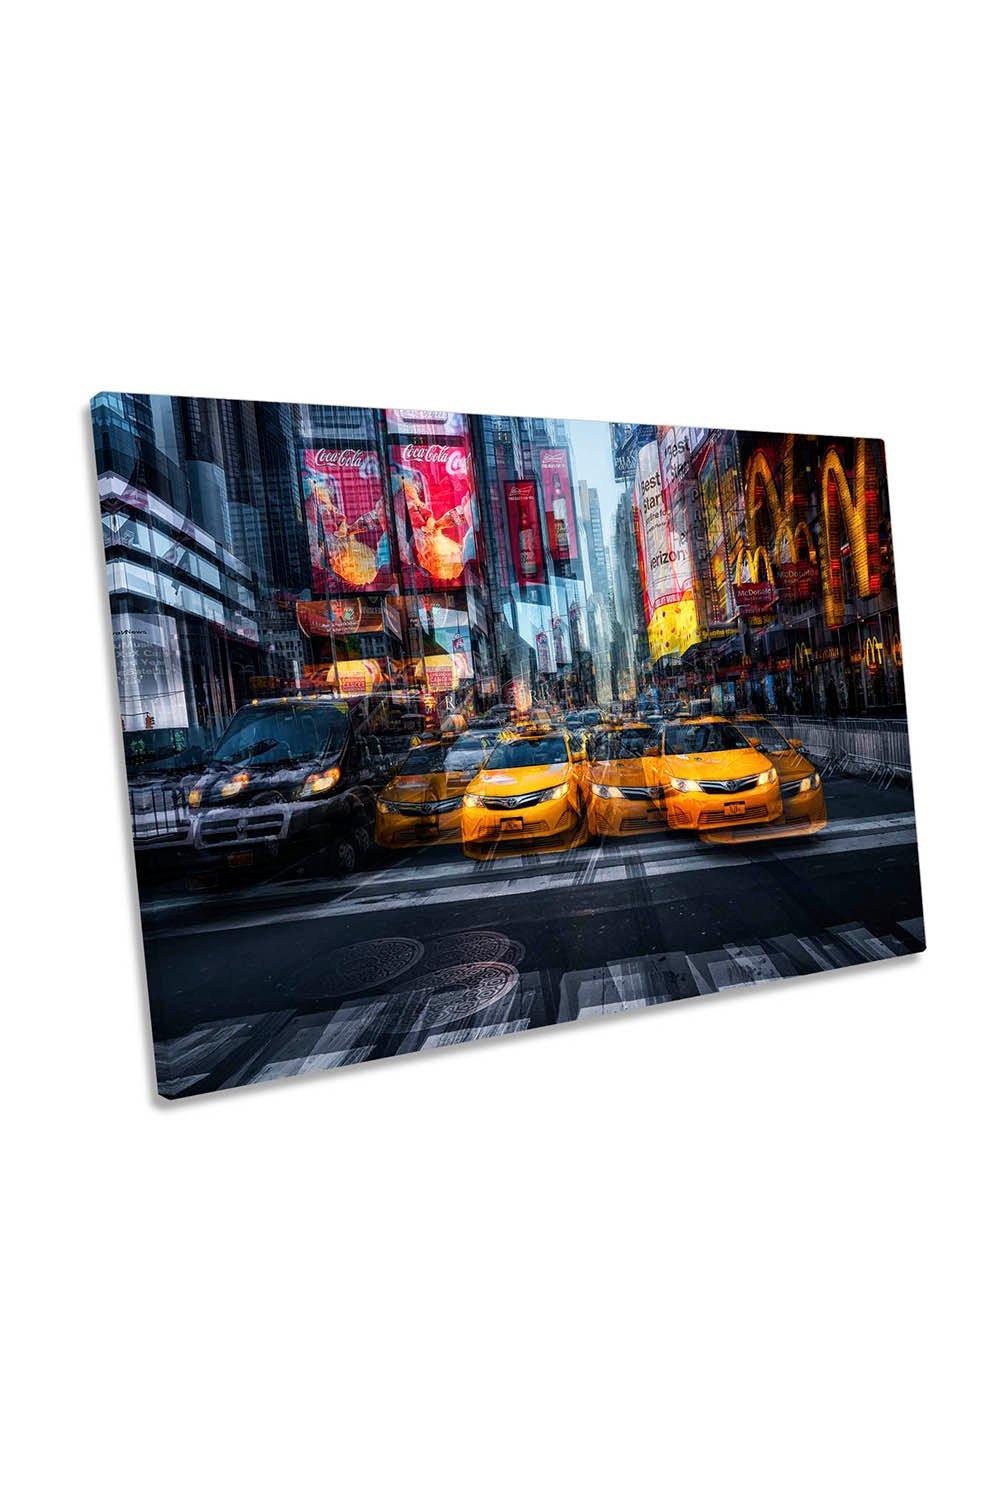 Taxis in New York City Modern Abstract Canvas Wall Art Picture Print